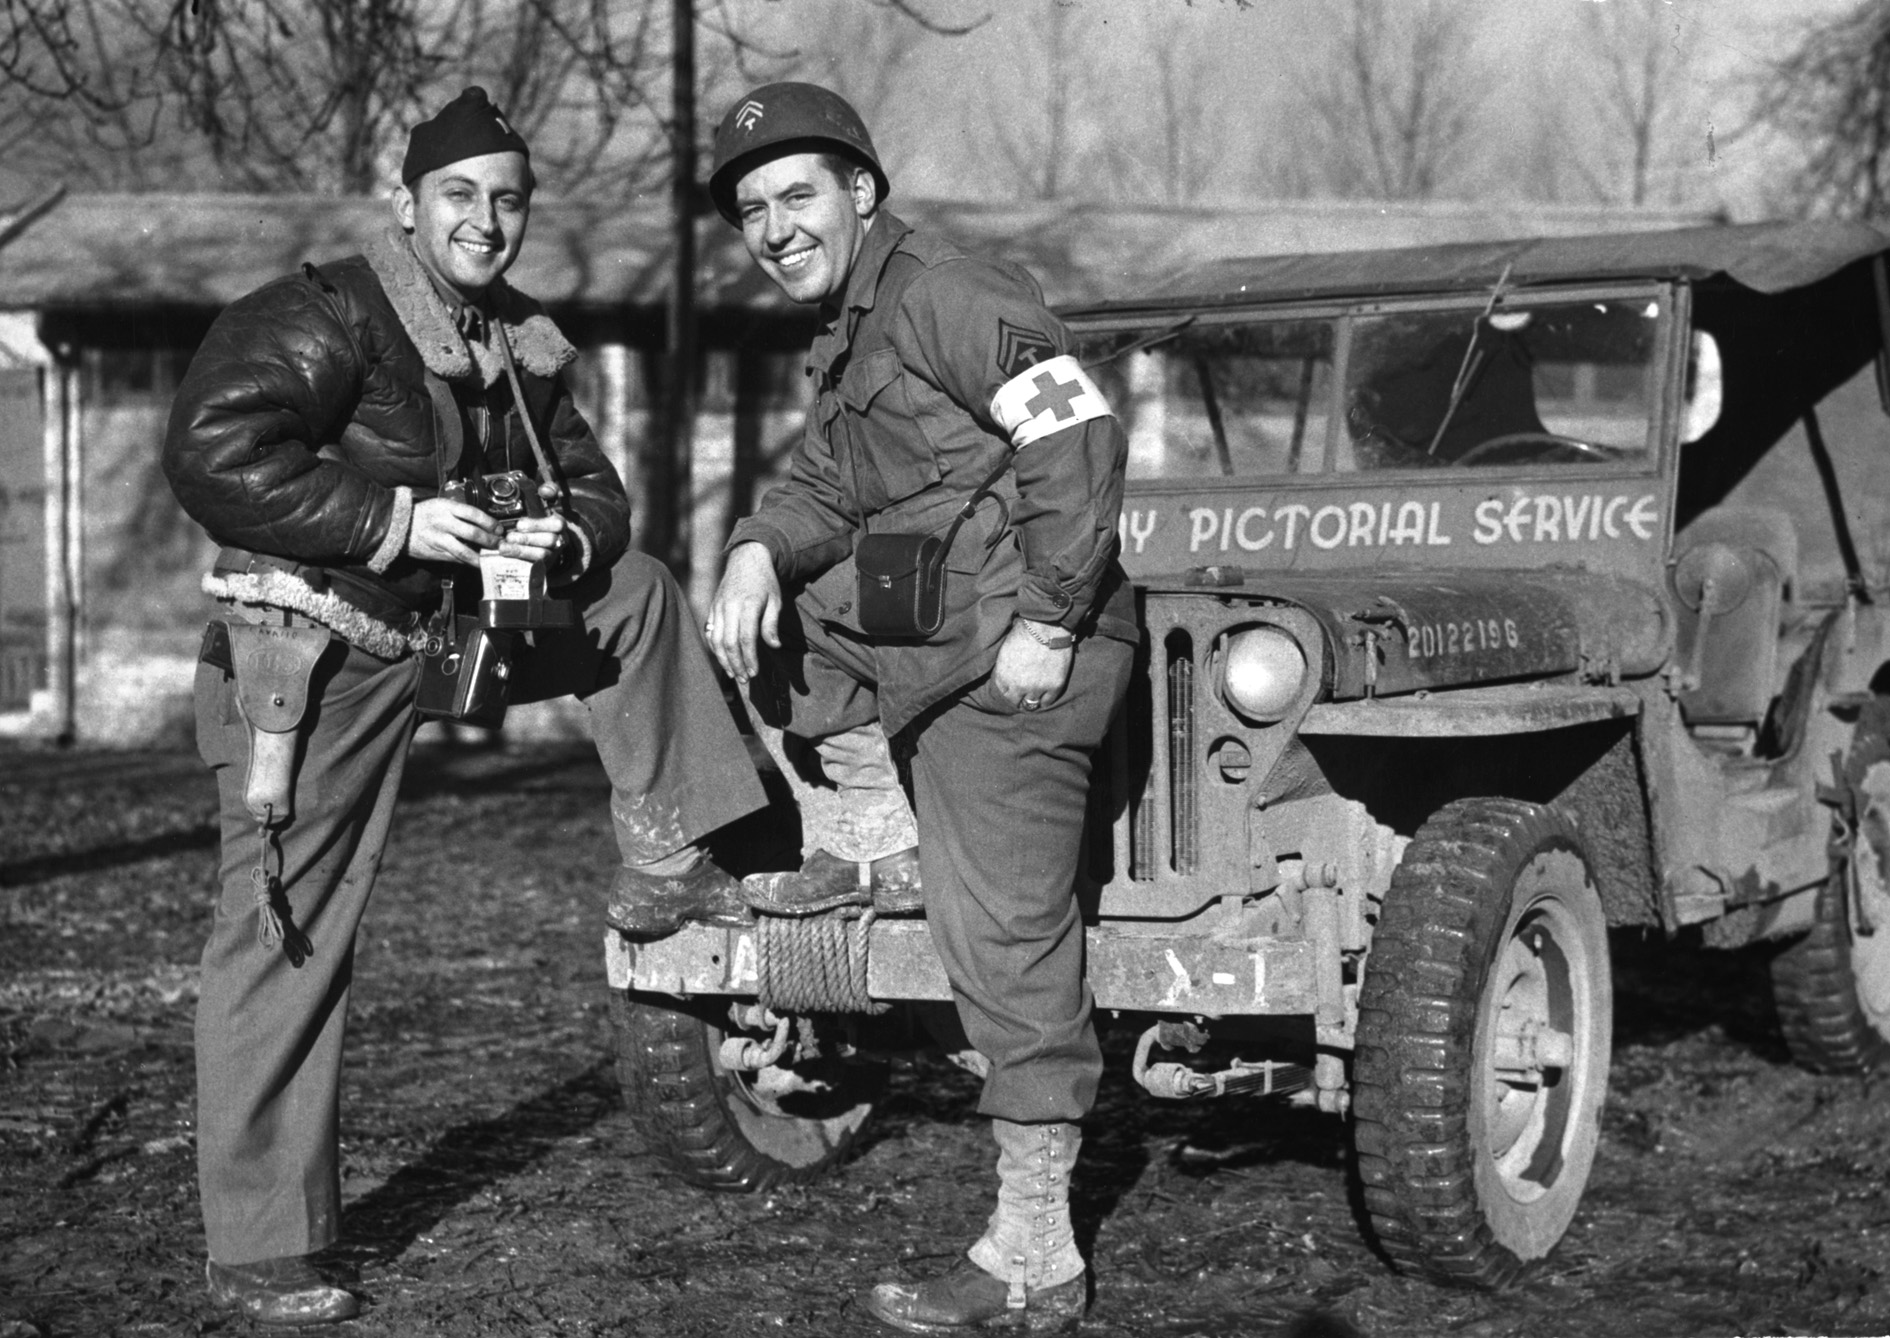 Lieutenant WIlliam Wilson chats with a medic. Note the jeep windshield frame that says it belongs to the Army Pictorial Service.